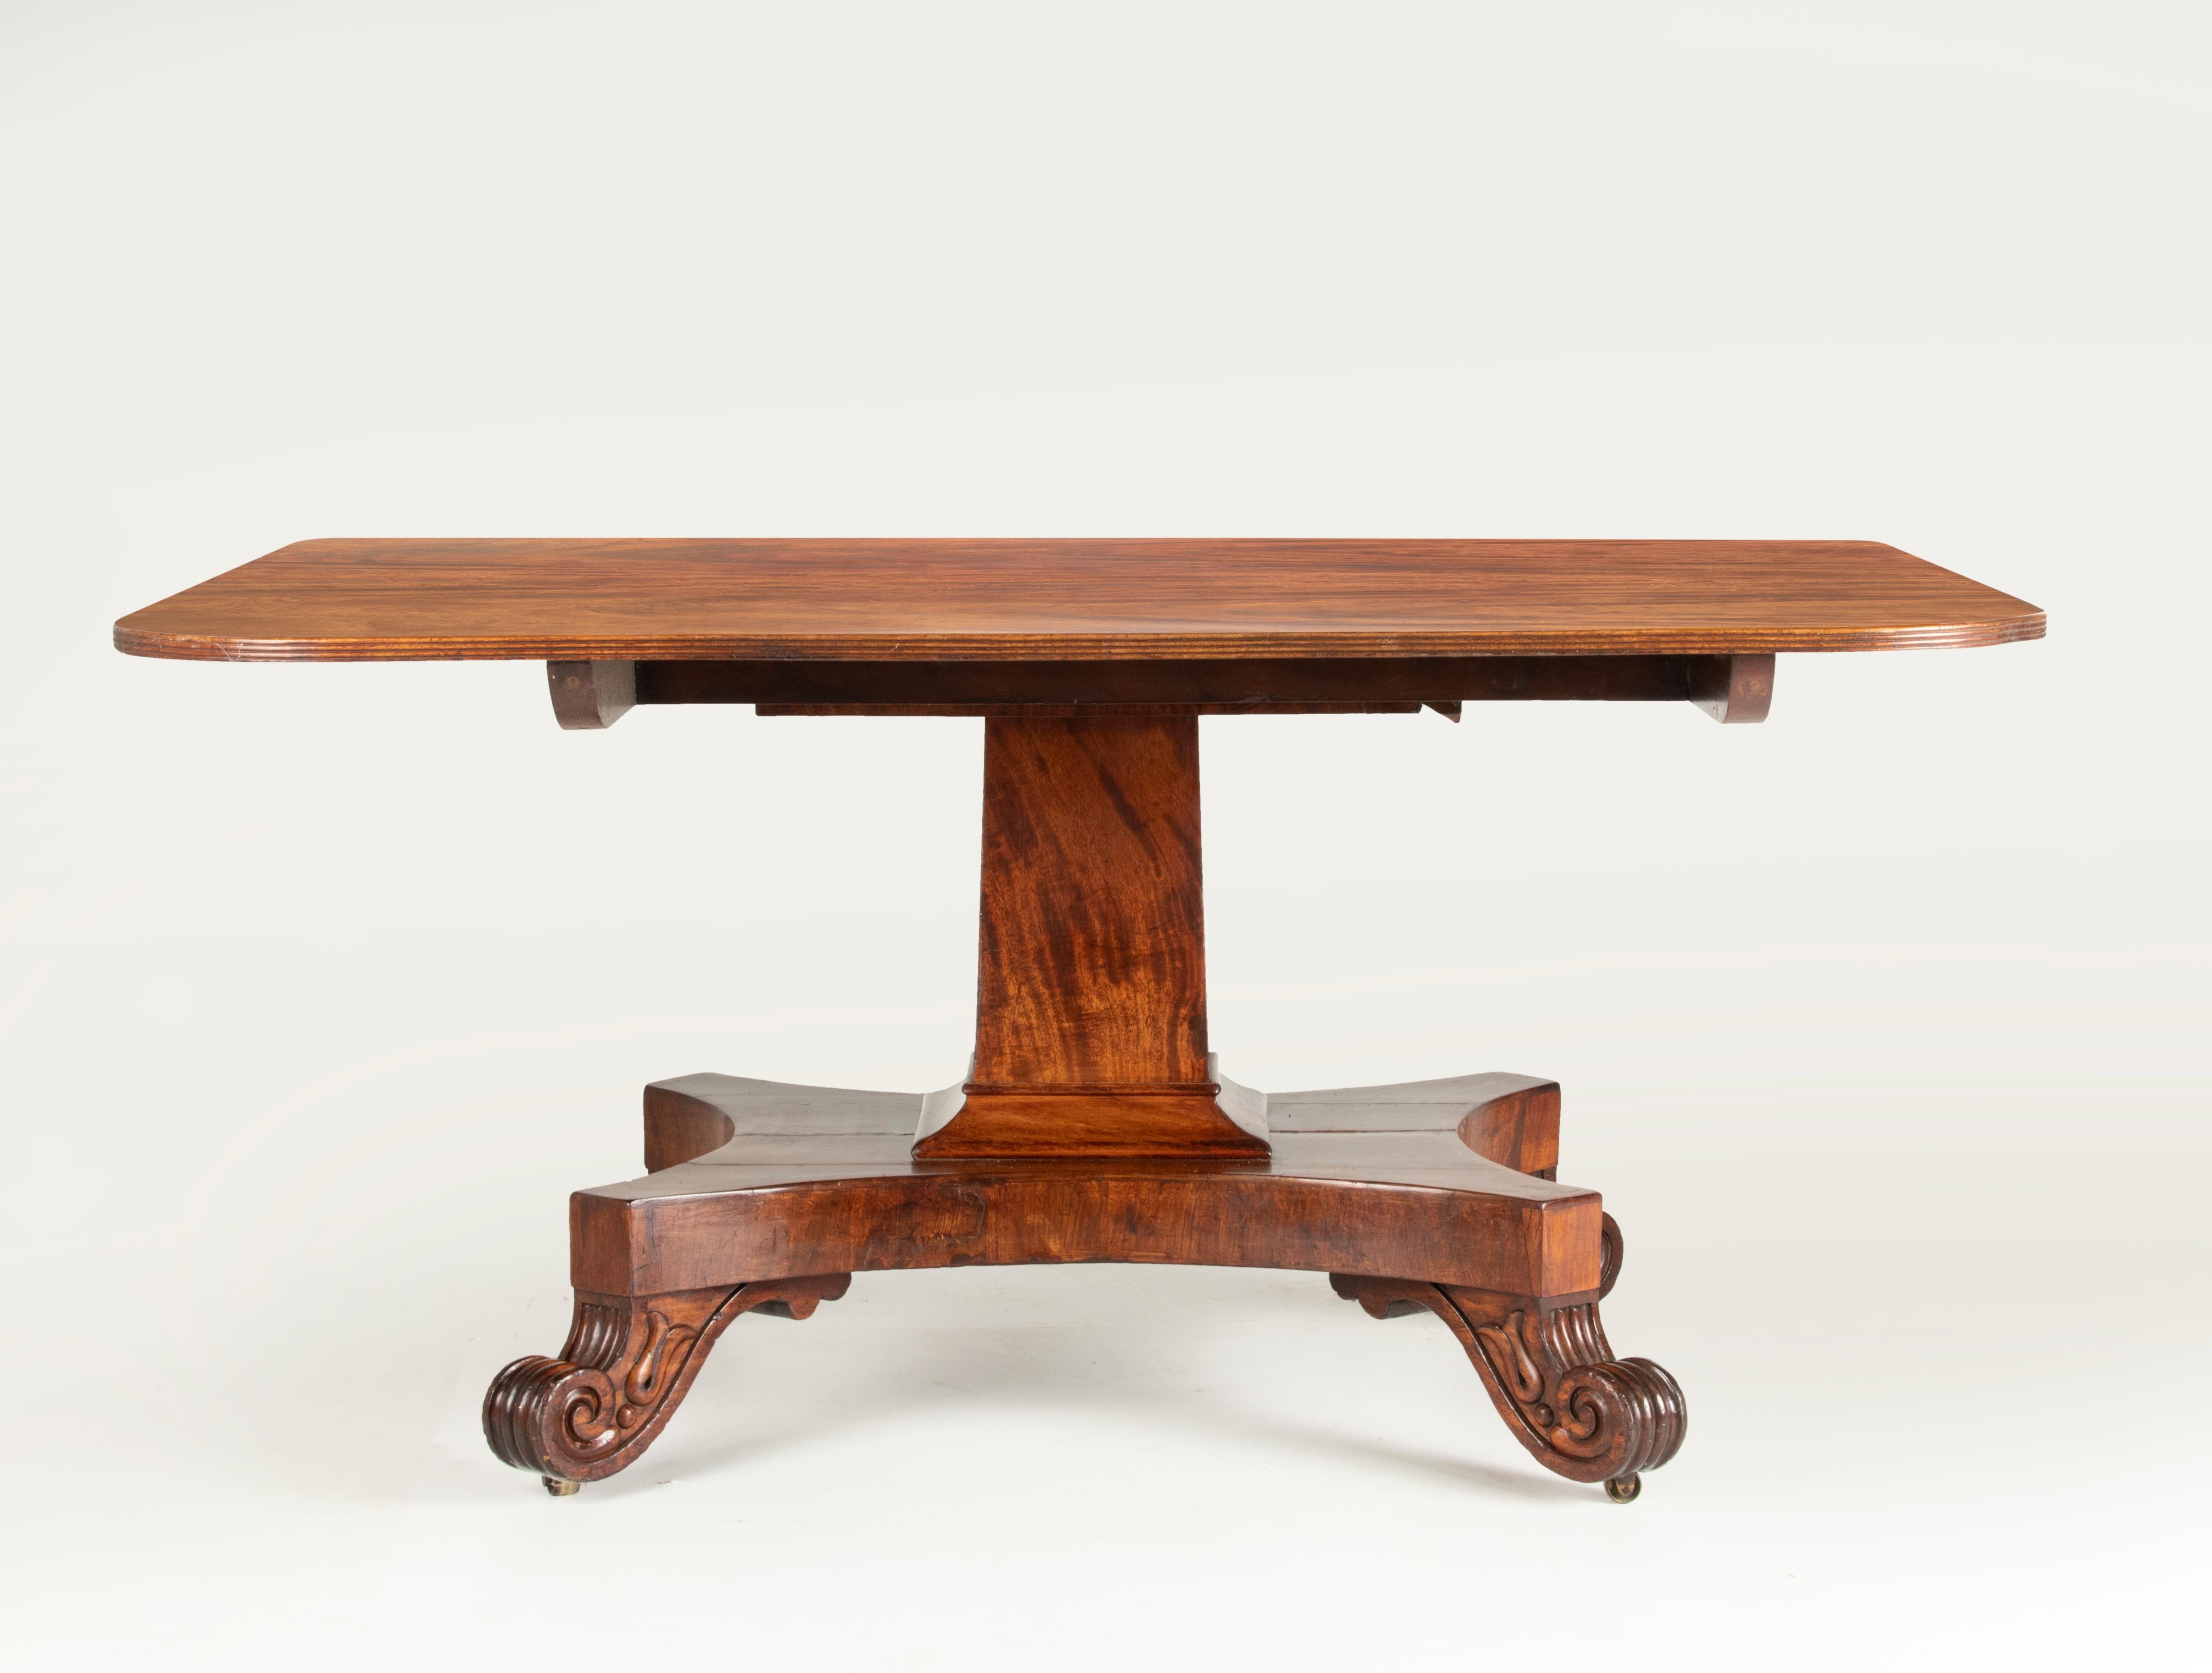 An Antique English Regency style dining room table with a rectangular top. The table is made of mahogany veneer, the top has a nice warm look and feel. Rests on a pedestal base with carved feet with small wheels underneath. Made in England, circa